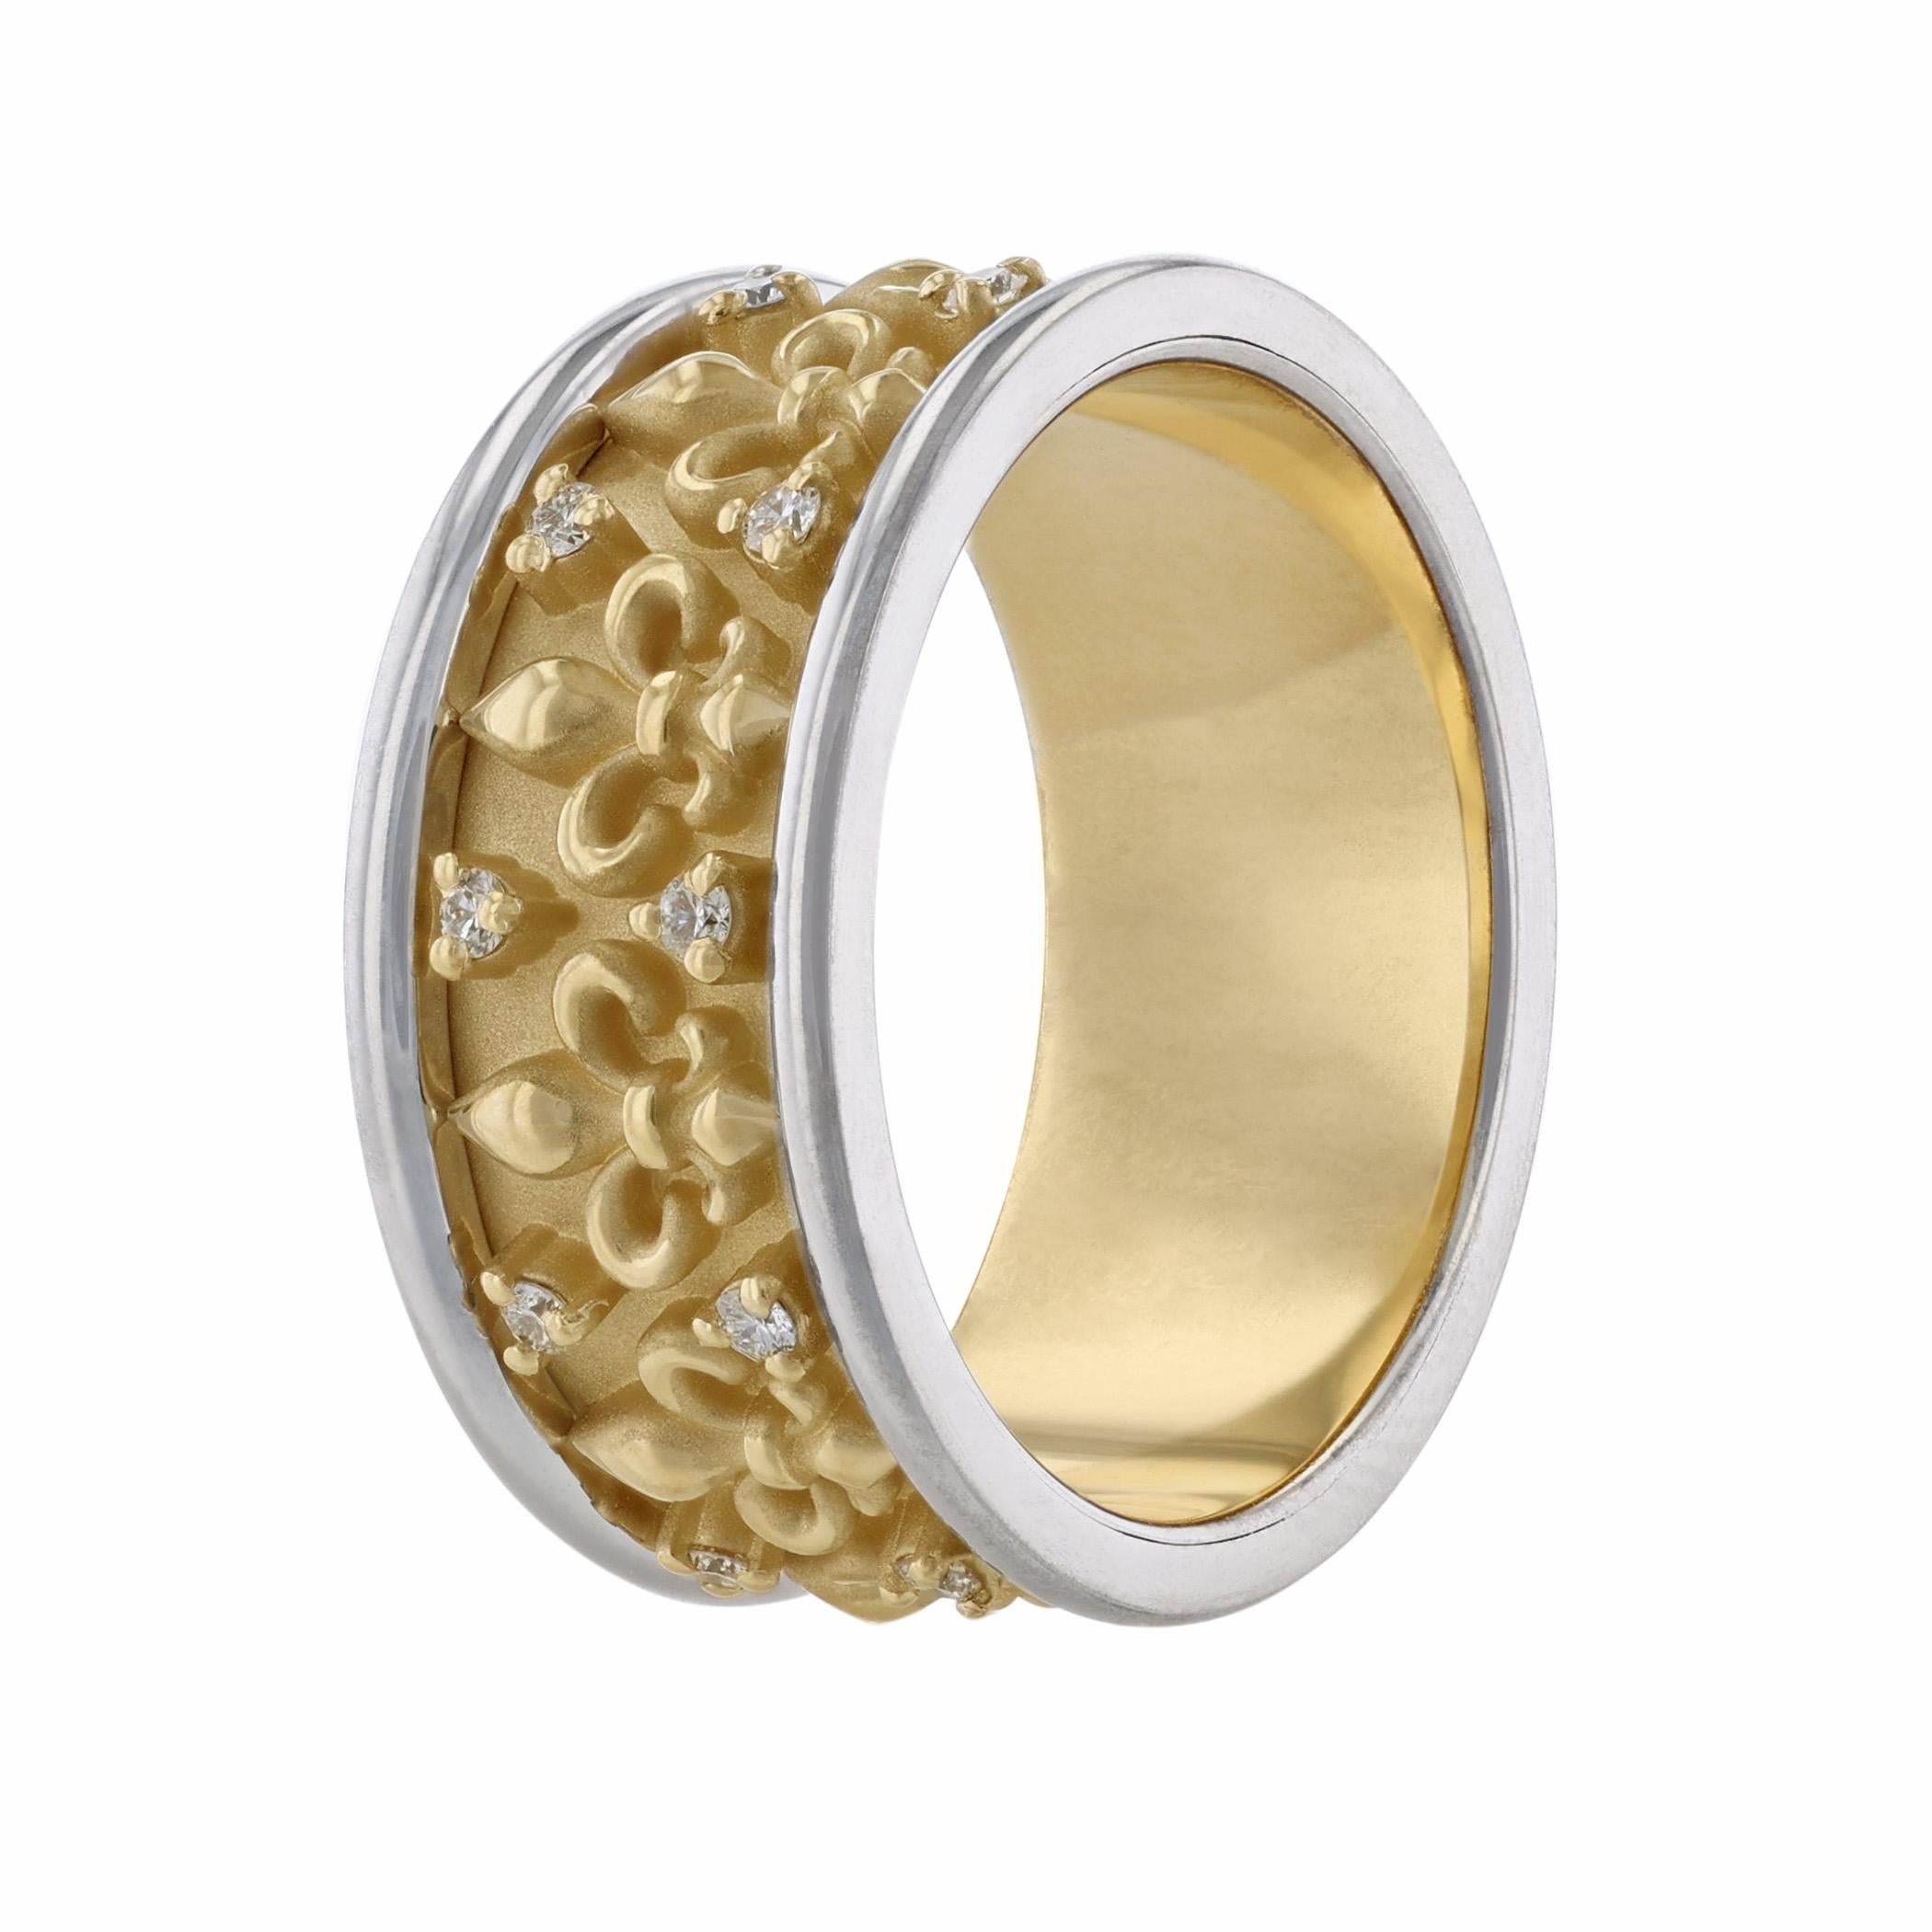 This men’s eternity band is 14K white and yellow gold. It features a pattern of fleur de lis with 20 round cut diamonds. All stones are prong set and weigh 0.48 carats combined. The ring has a color grade (H) and a clarity grade of (SI2)